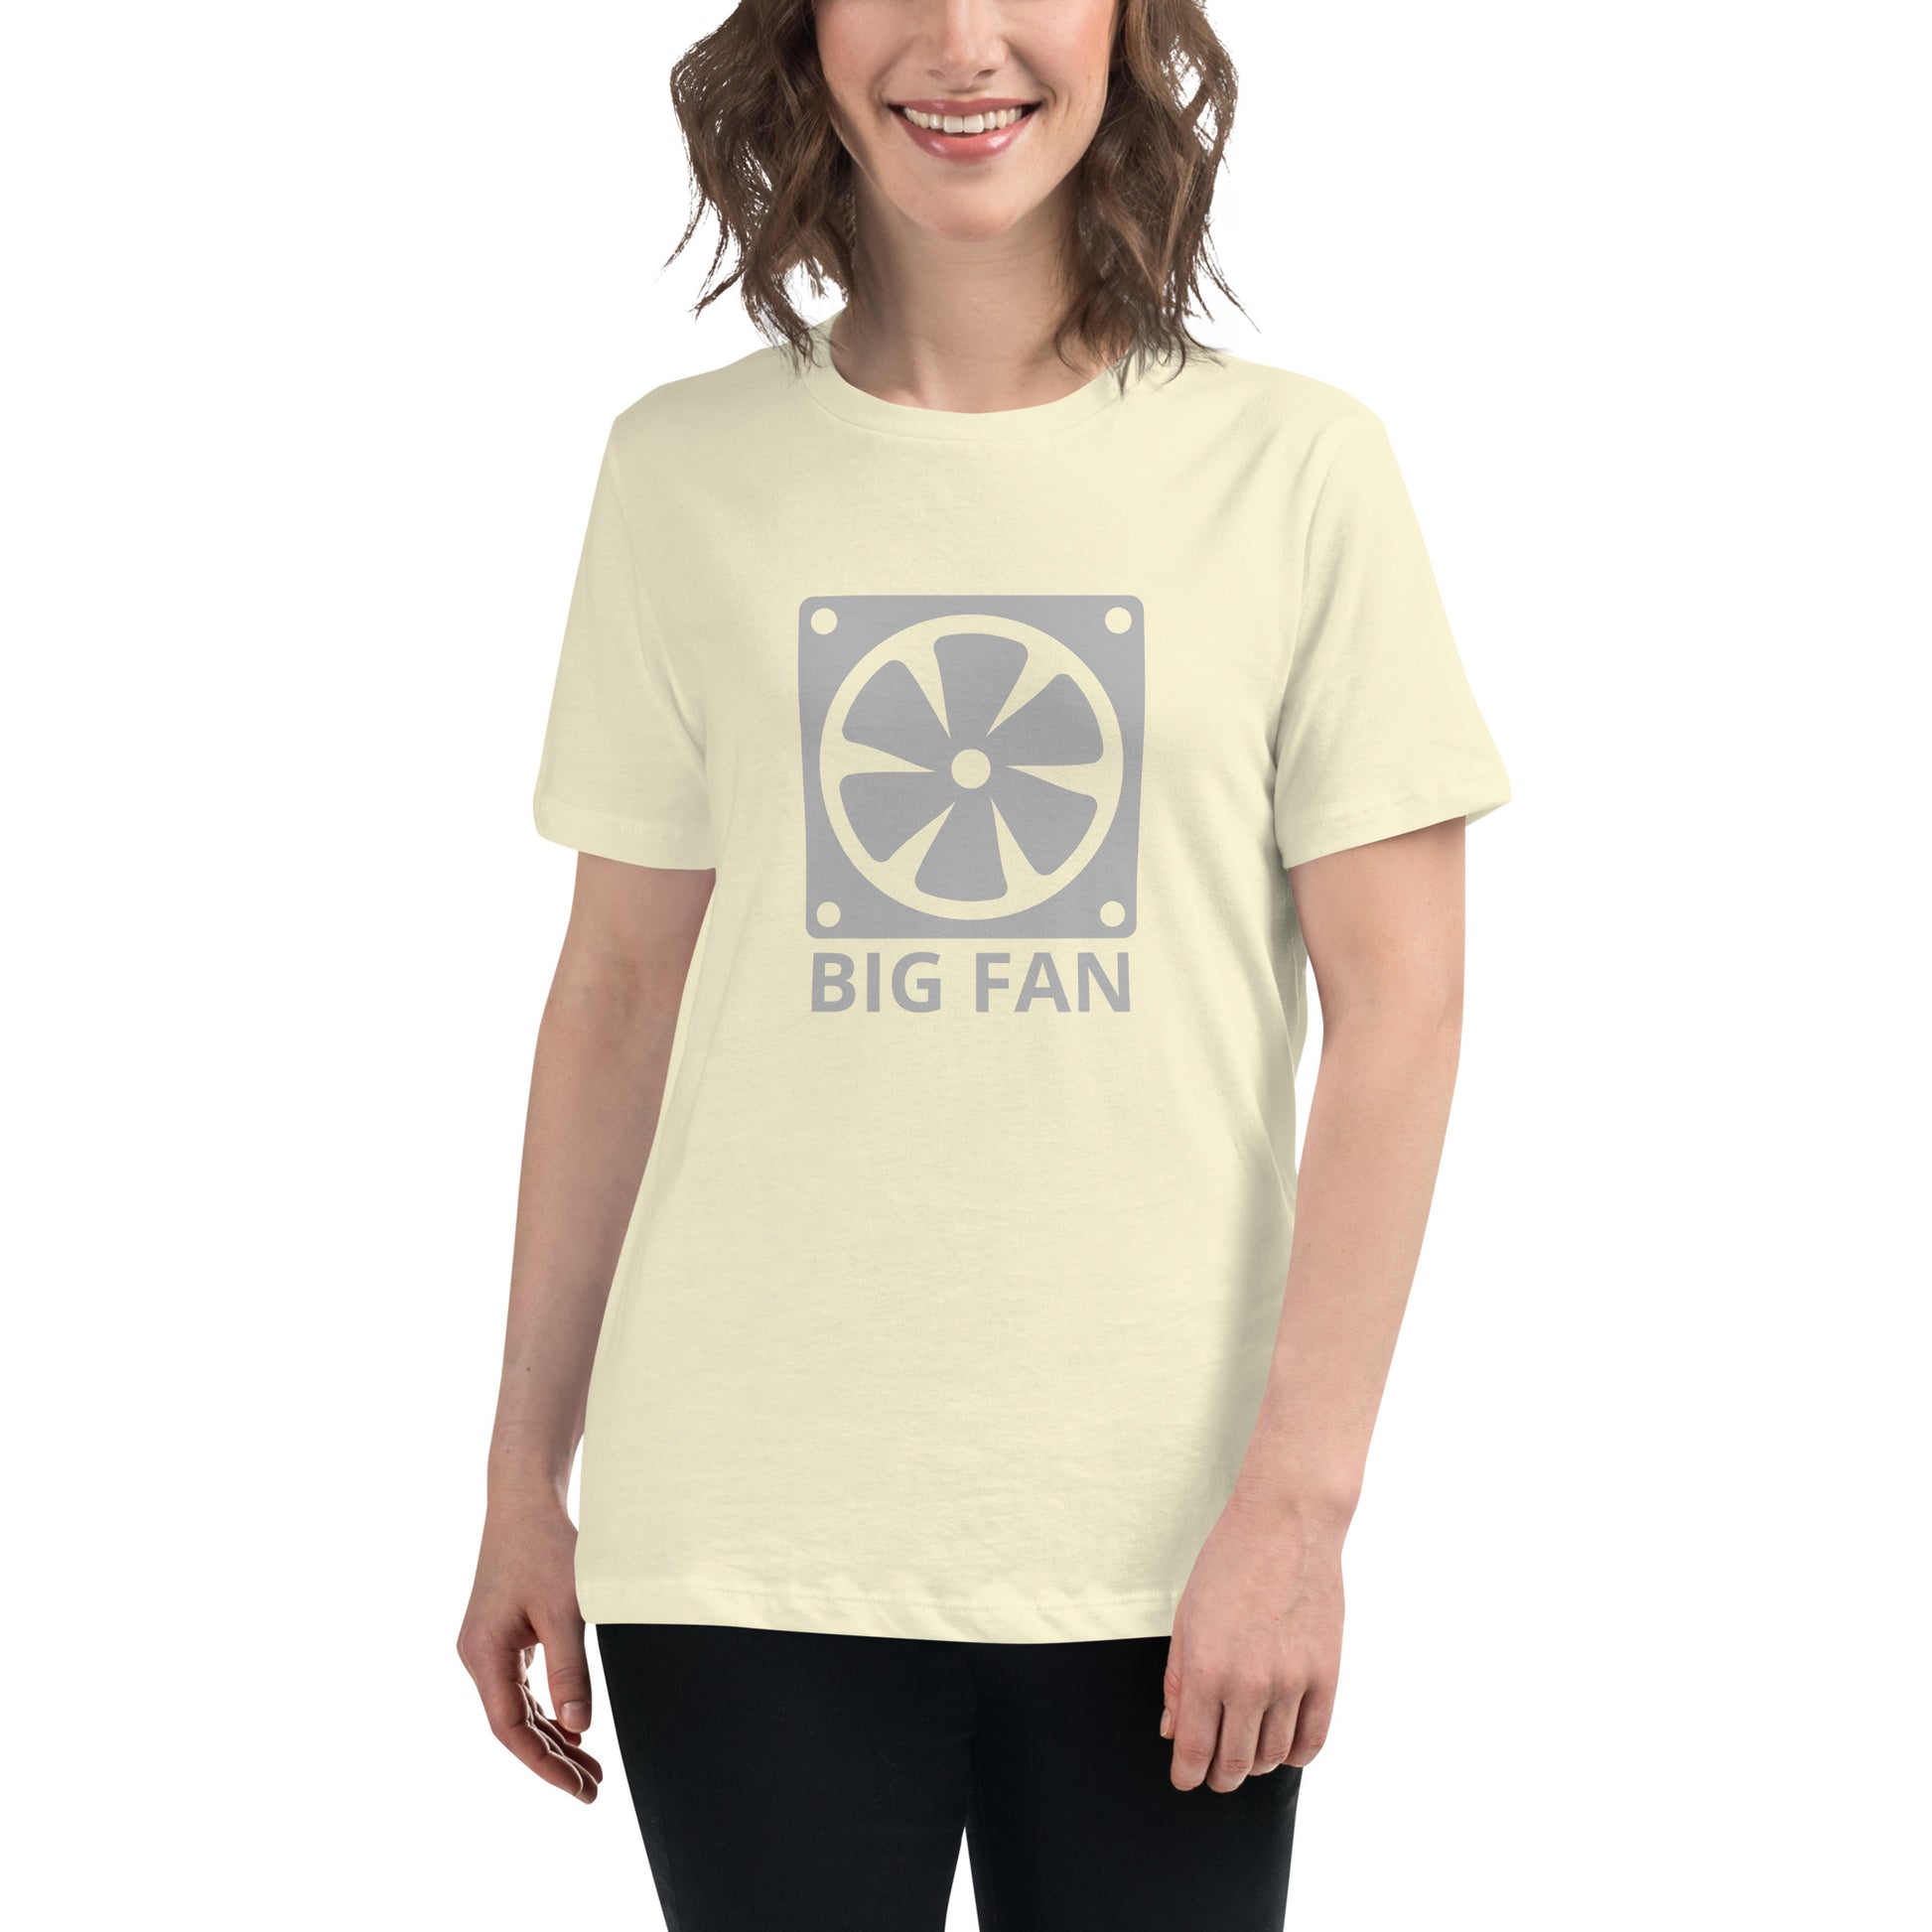 Women with citron t-shirt with image of a big computer fan and the text "BIG FAN"